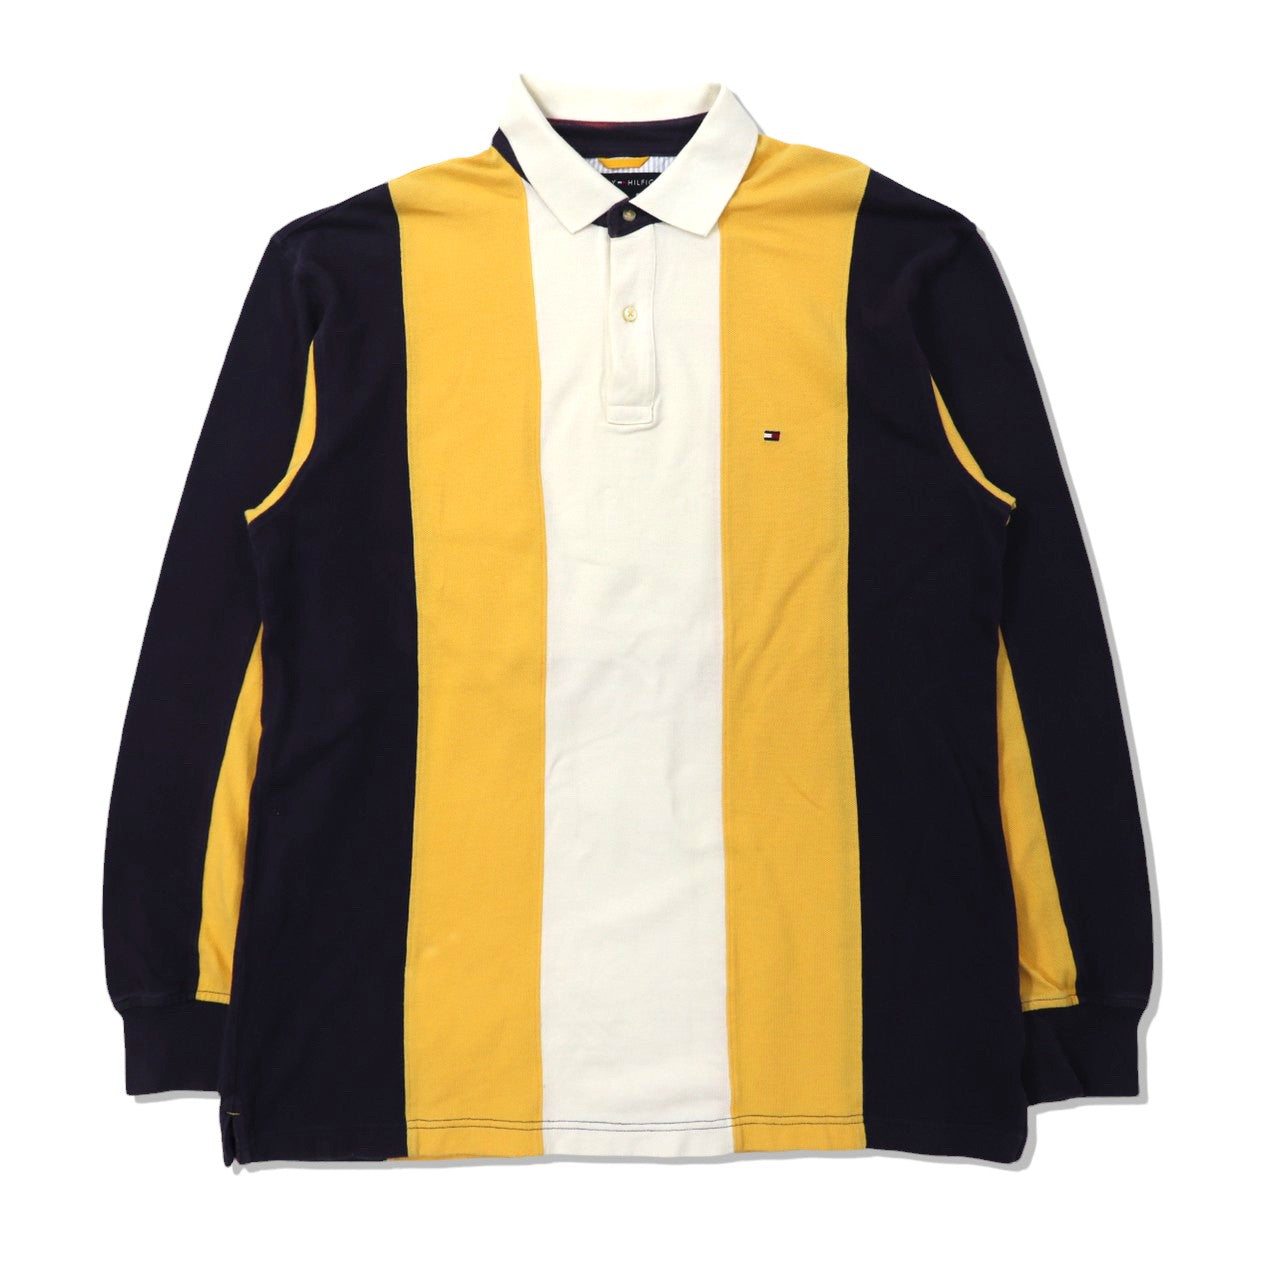 TOMMY HILFIGER RUGBY SHIRT L Yellow Navy Cotton 90s – 日本然リトテ